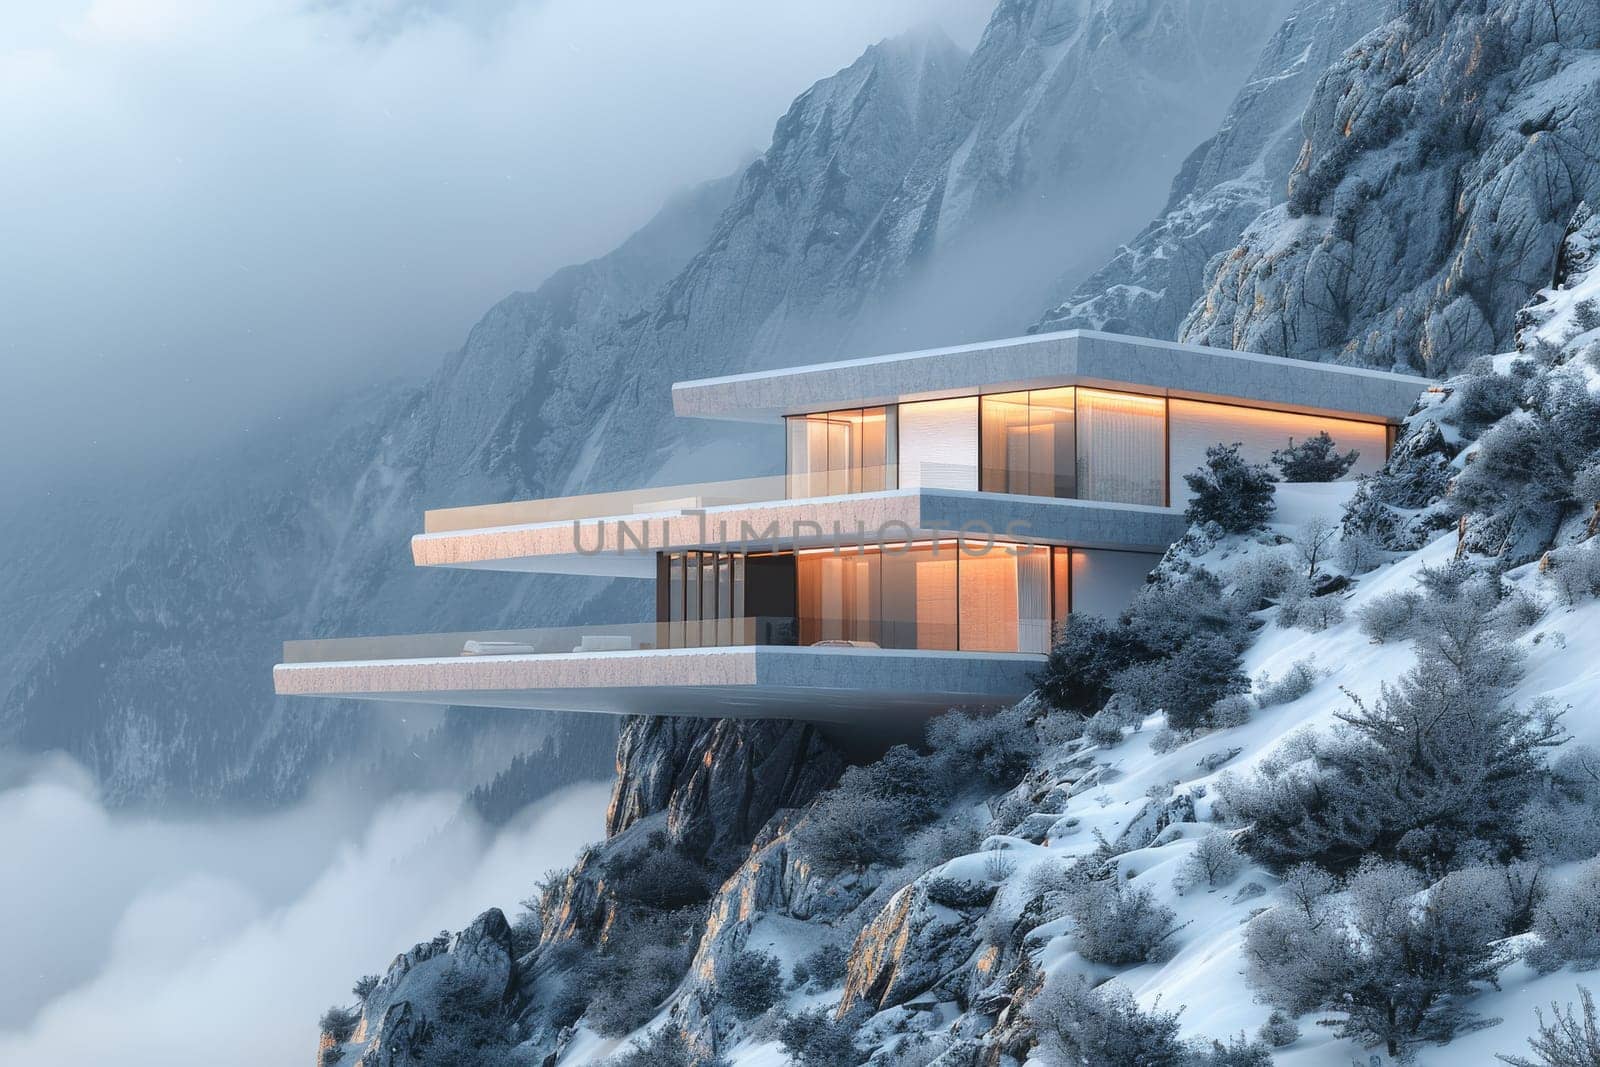 A house is built on a snowy mountain. The house is made of concrete and has a glass roof. The house is surrounded by trees and snow